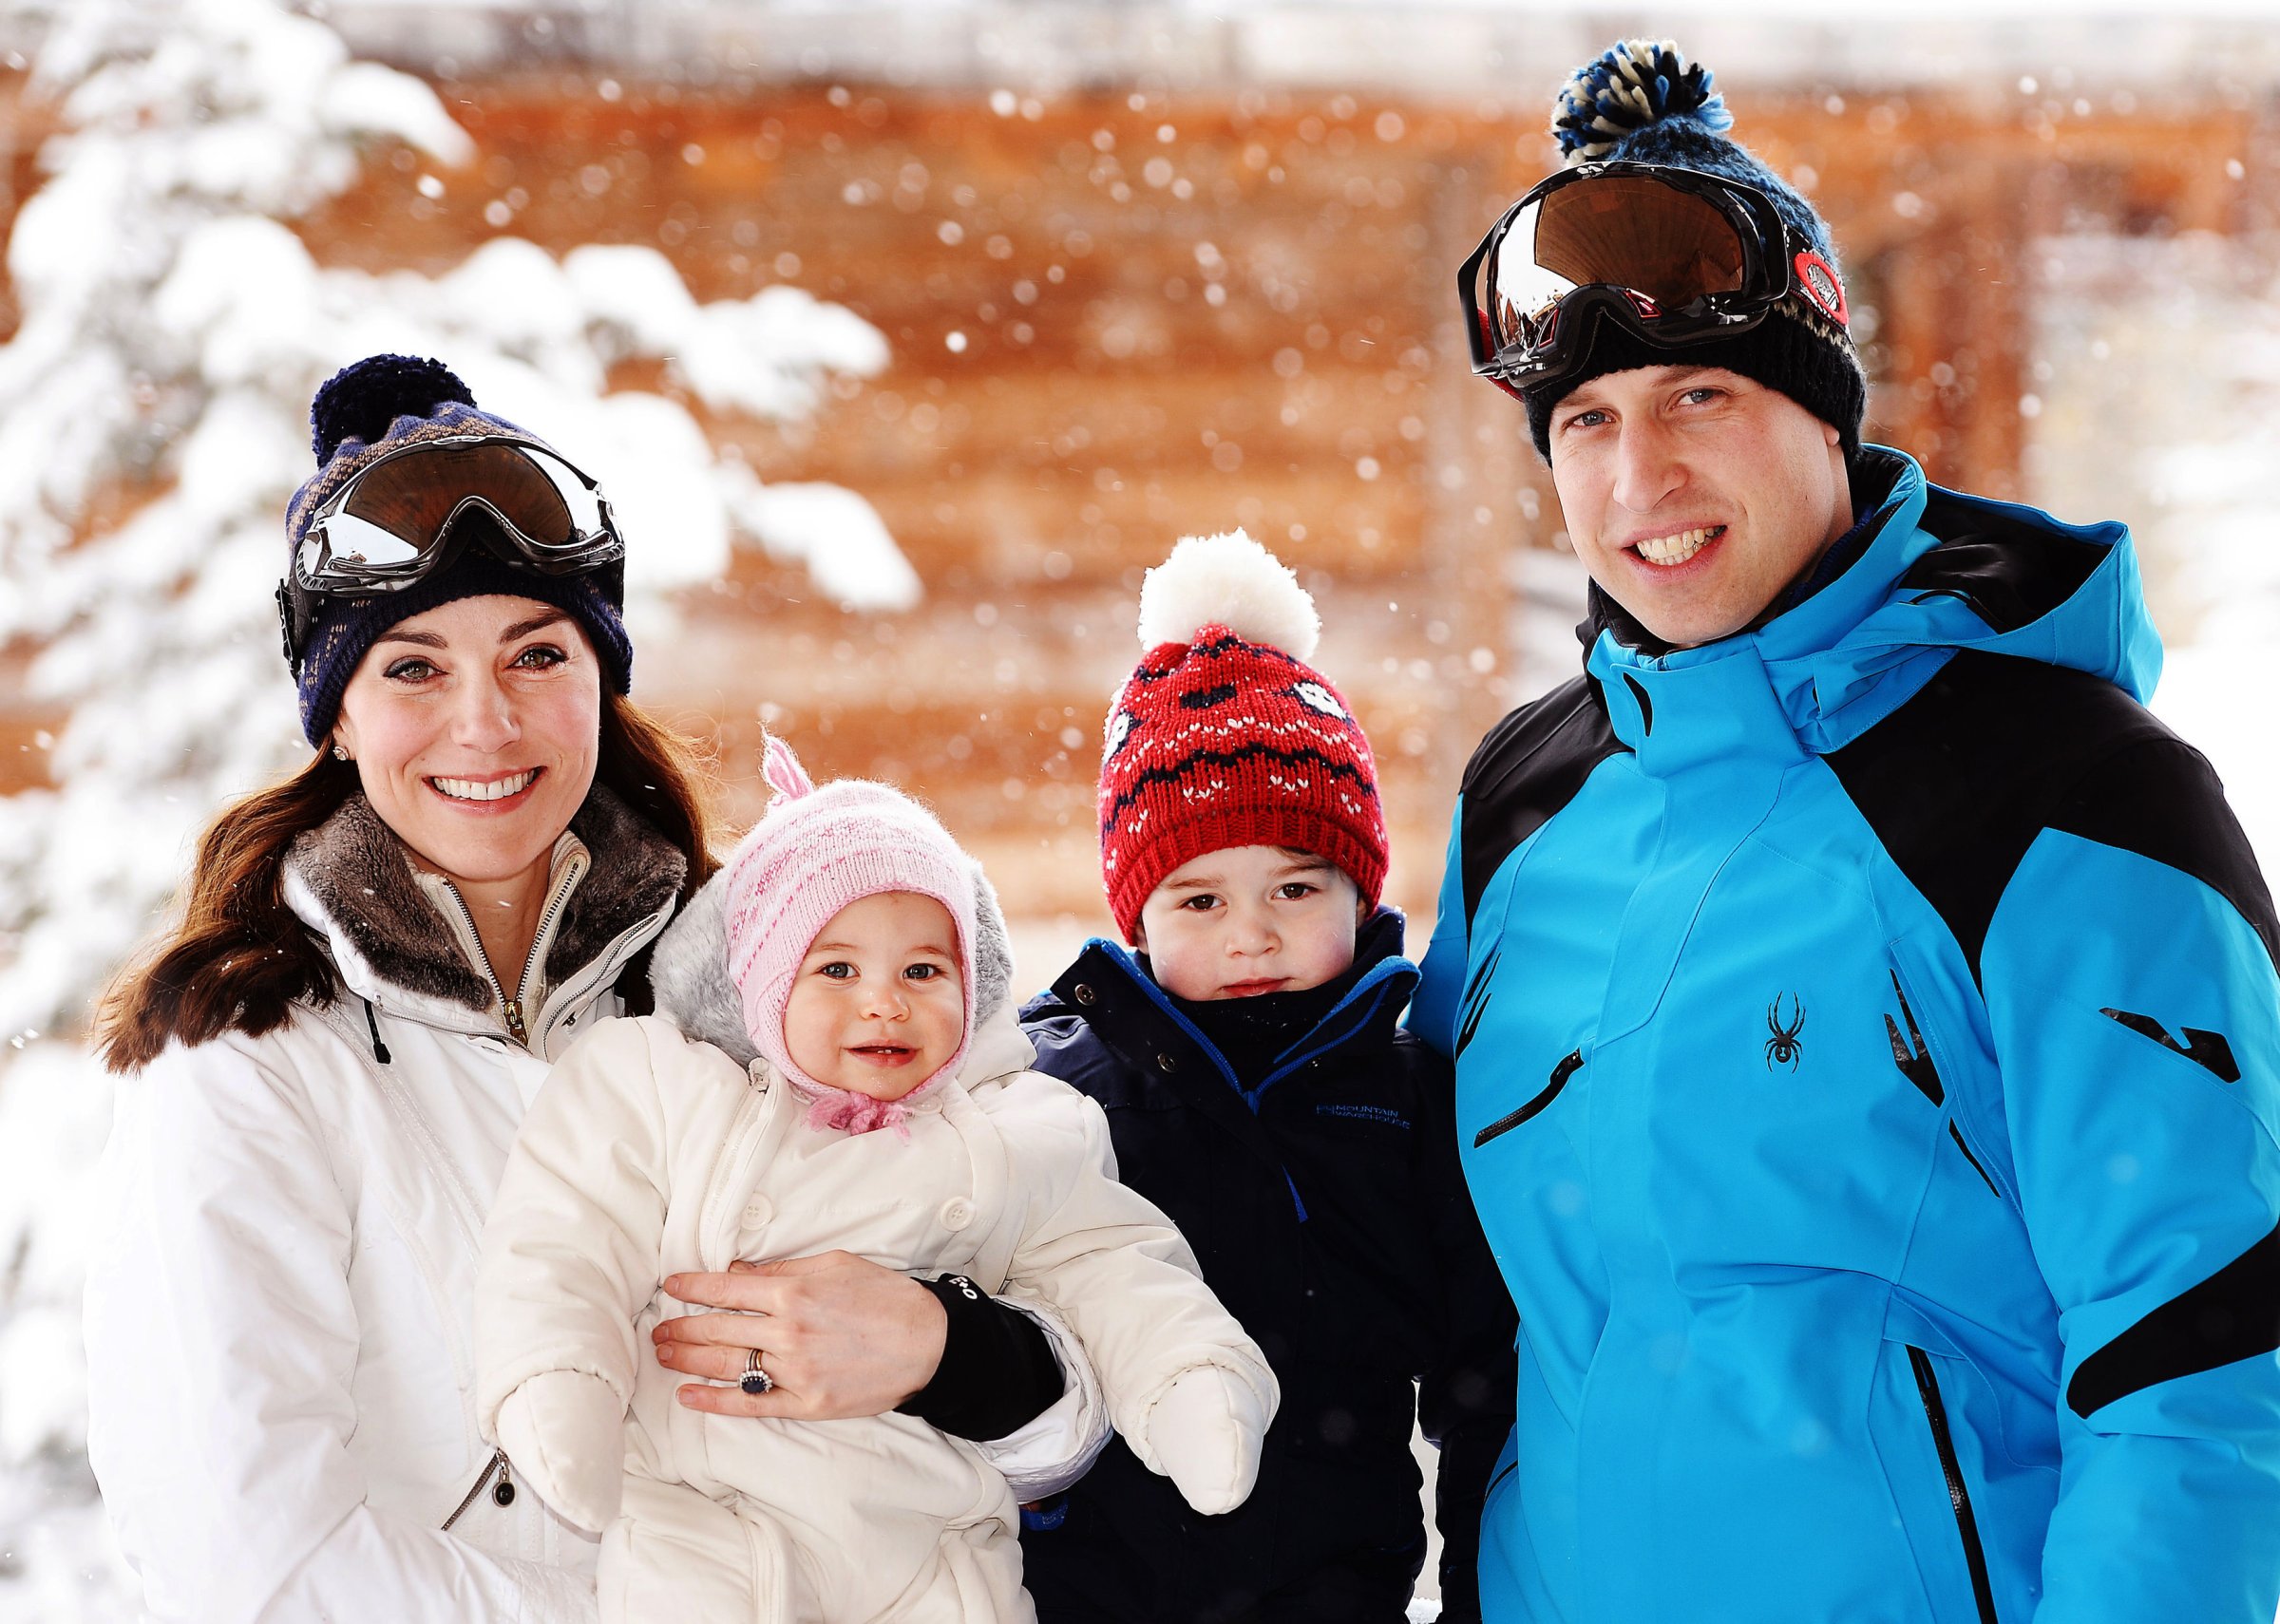 Catherine, Duchess of Cambridge, Kate Middleton, and Prince William, Duke of Cambridge, pose with their children, Princess Charlotte and Prince George during a private break skiing in the French Alps on March 3, 2016. Royals